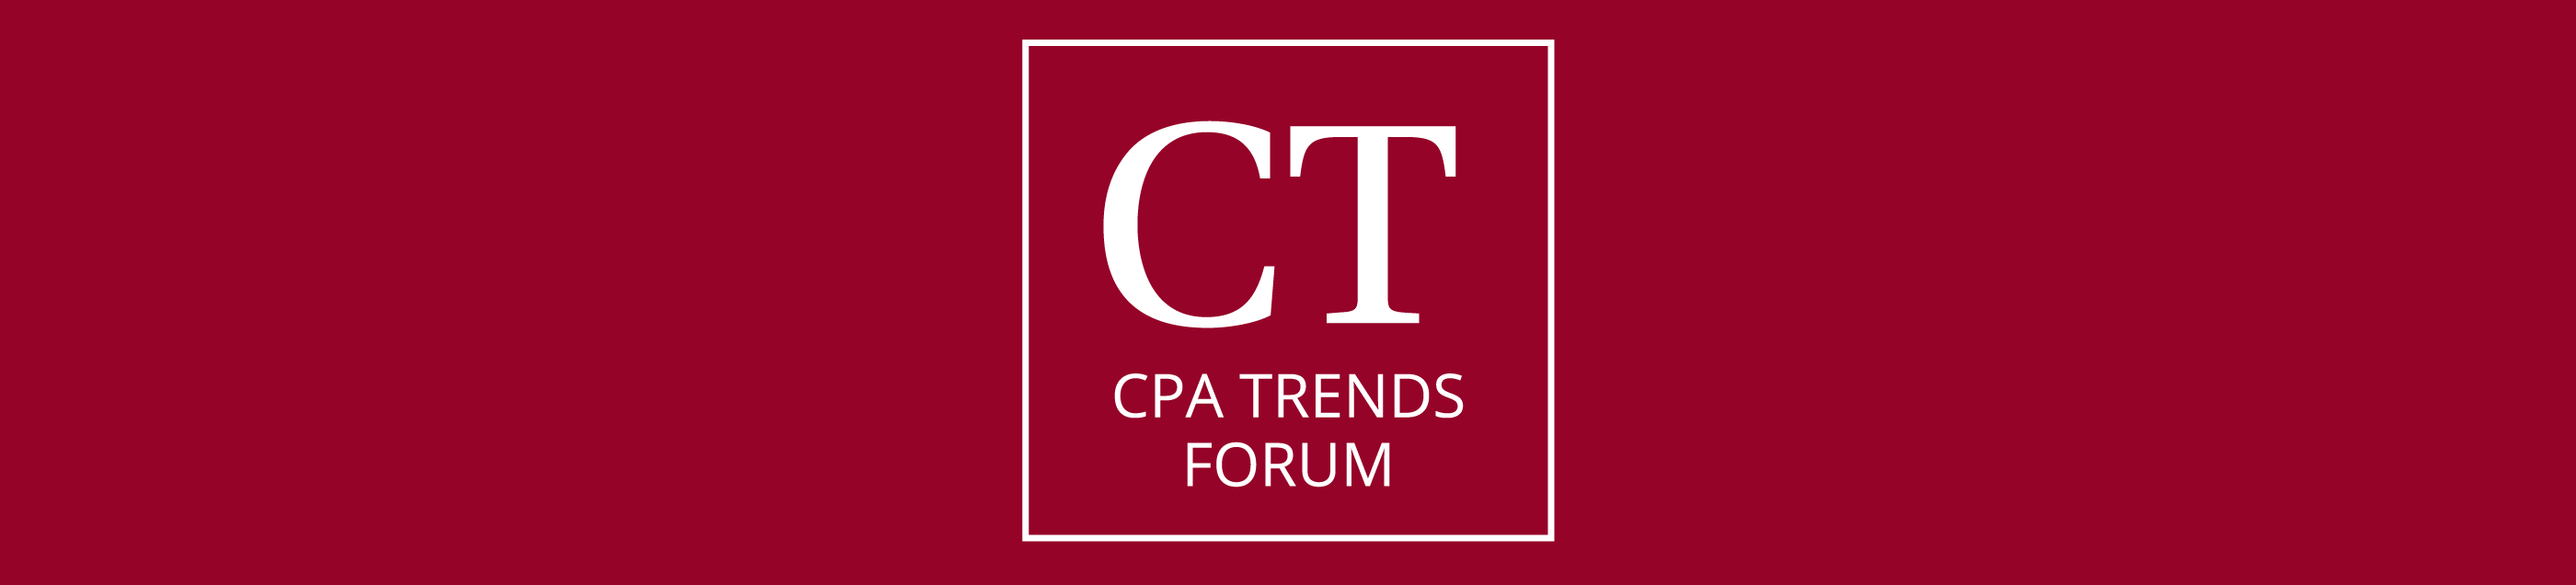 CPA Trends Forum banner image